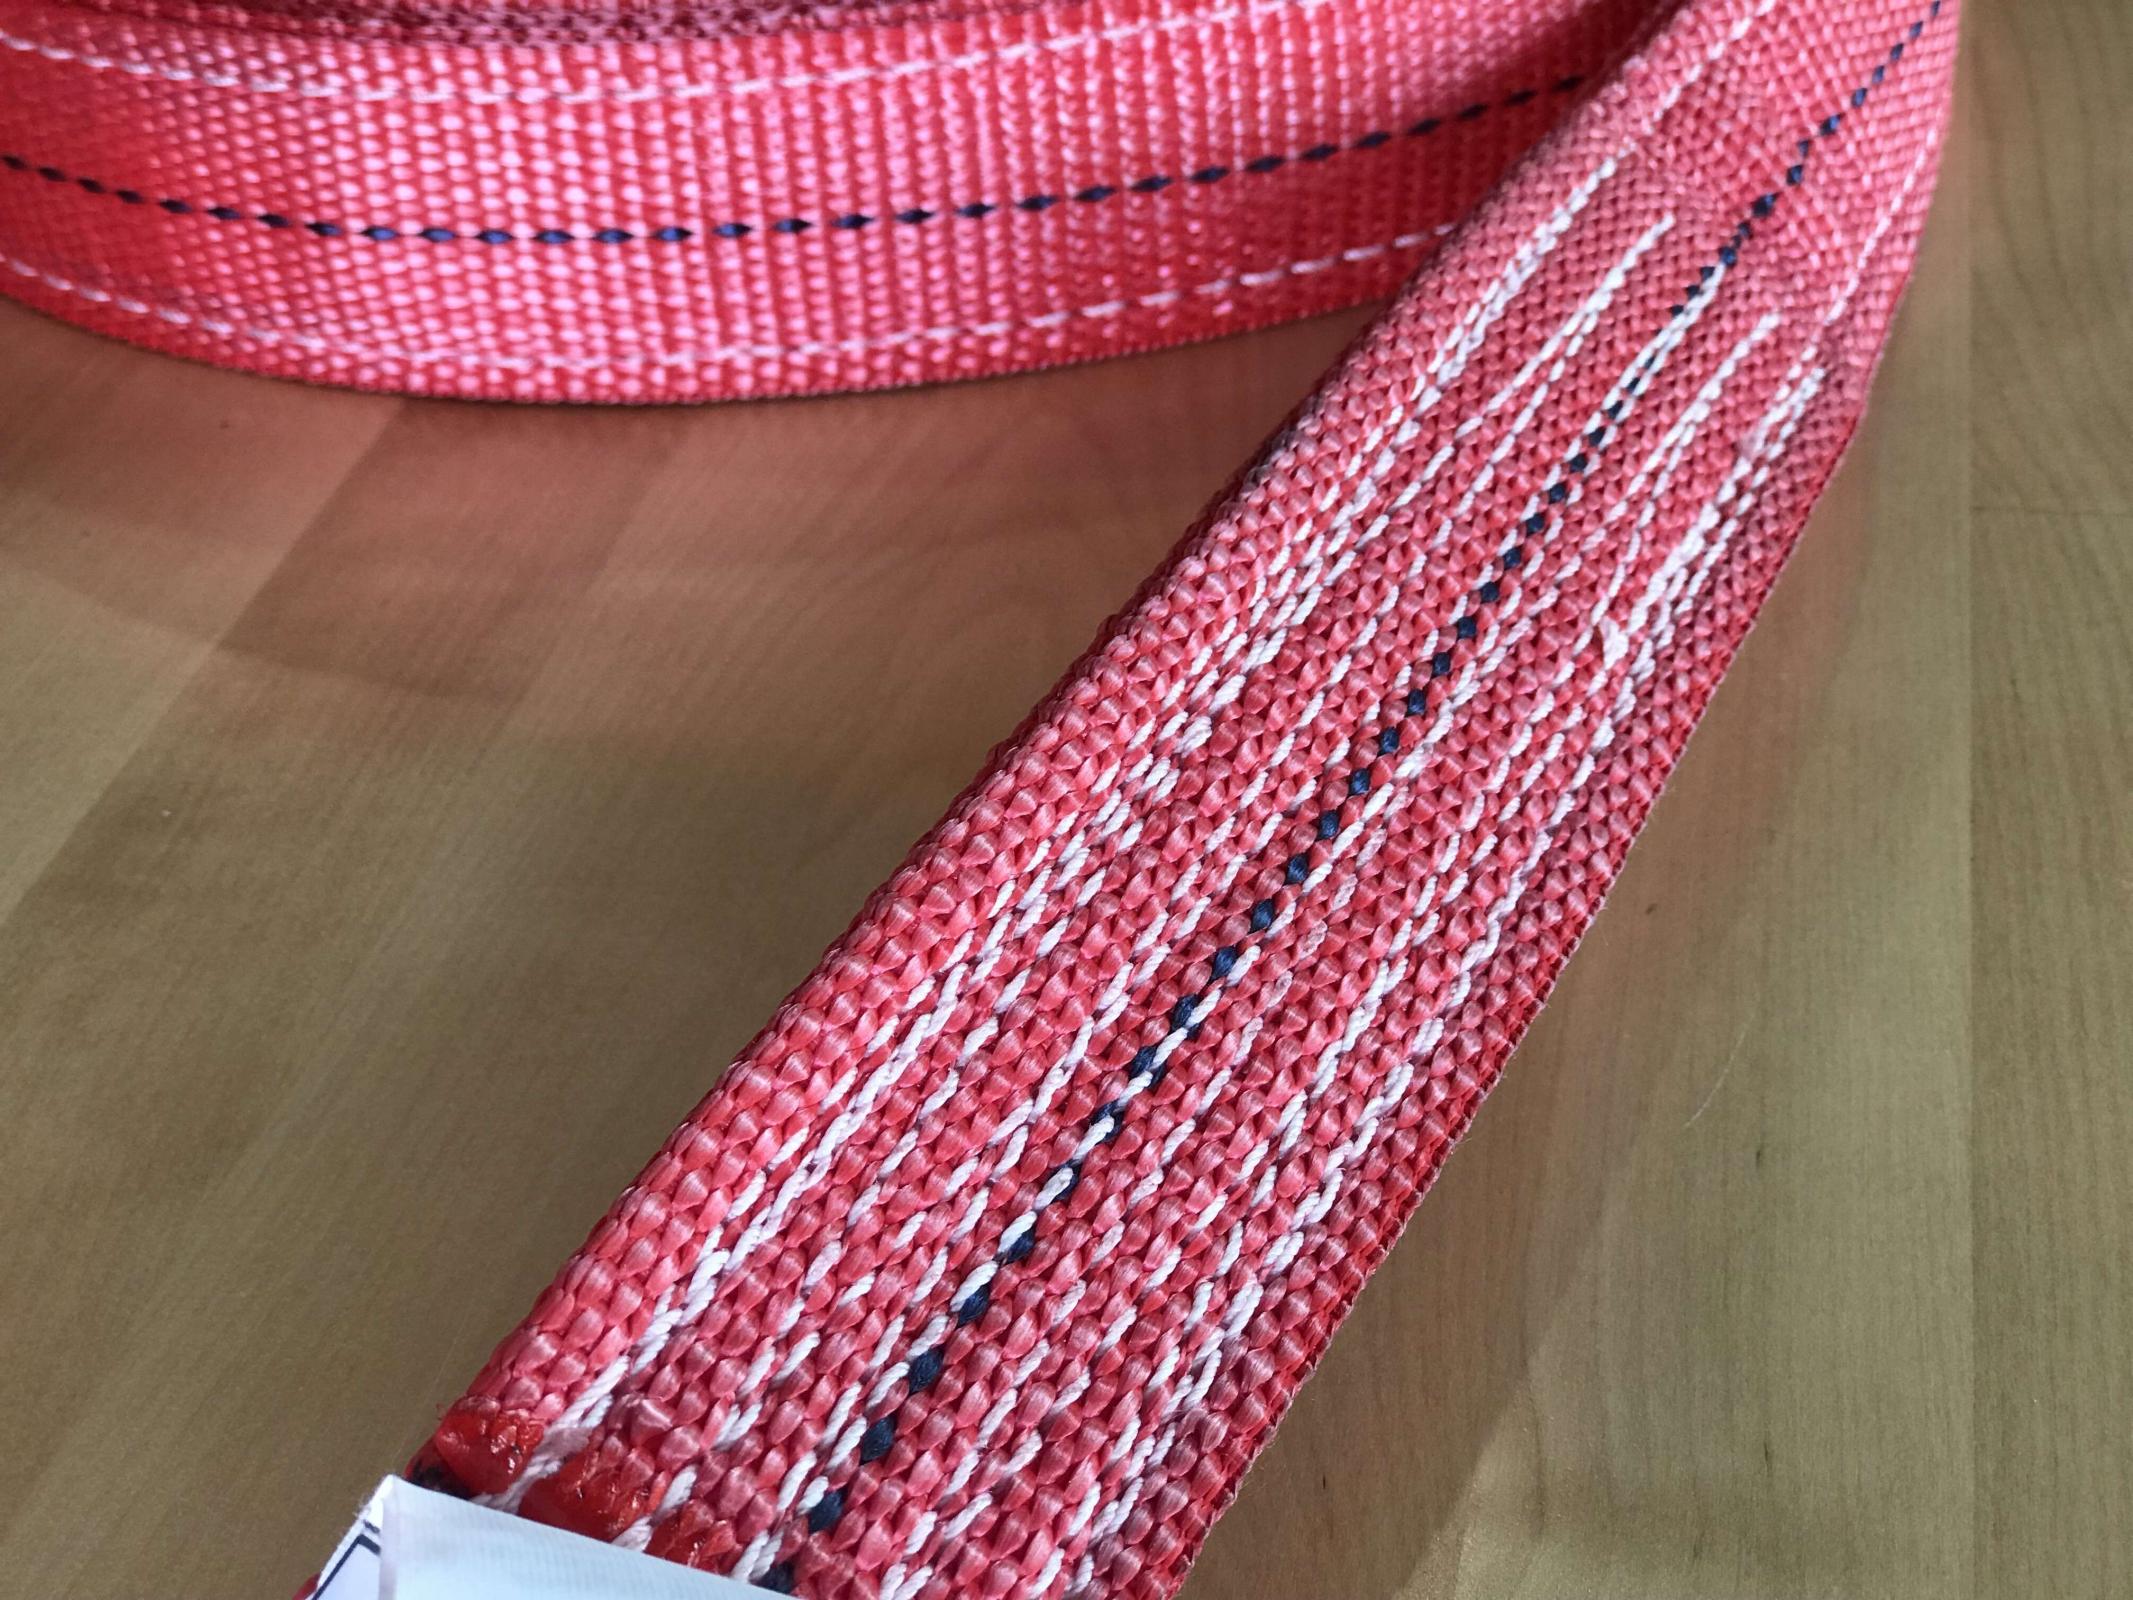 Factor 55 30 Foot Tow Strap Standard Duty 30 Foot x 2 Inch Red Factor 55